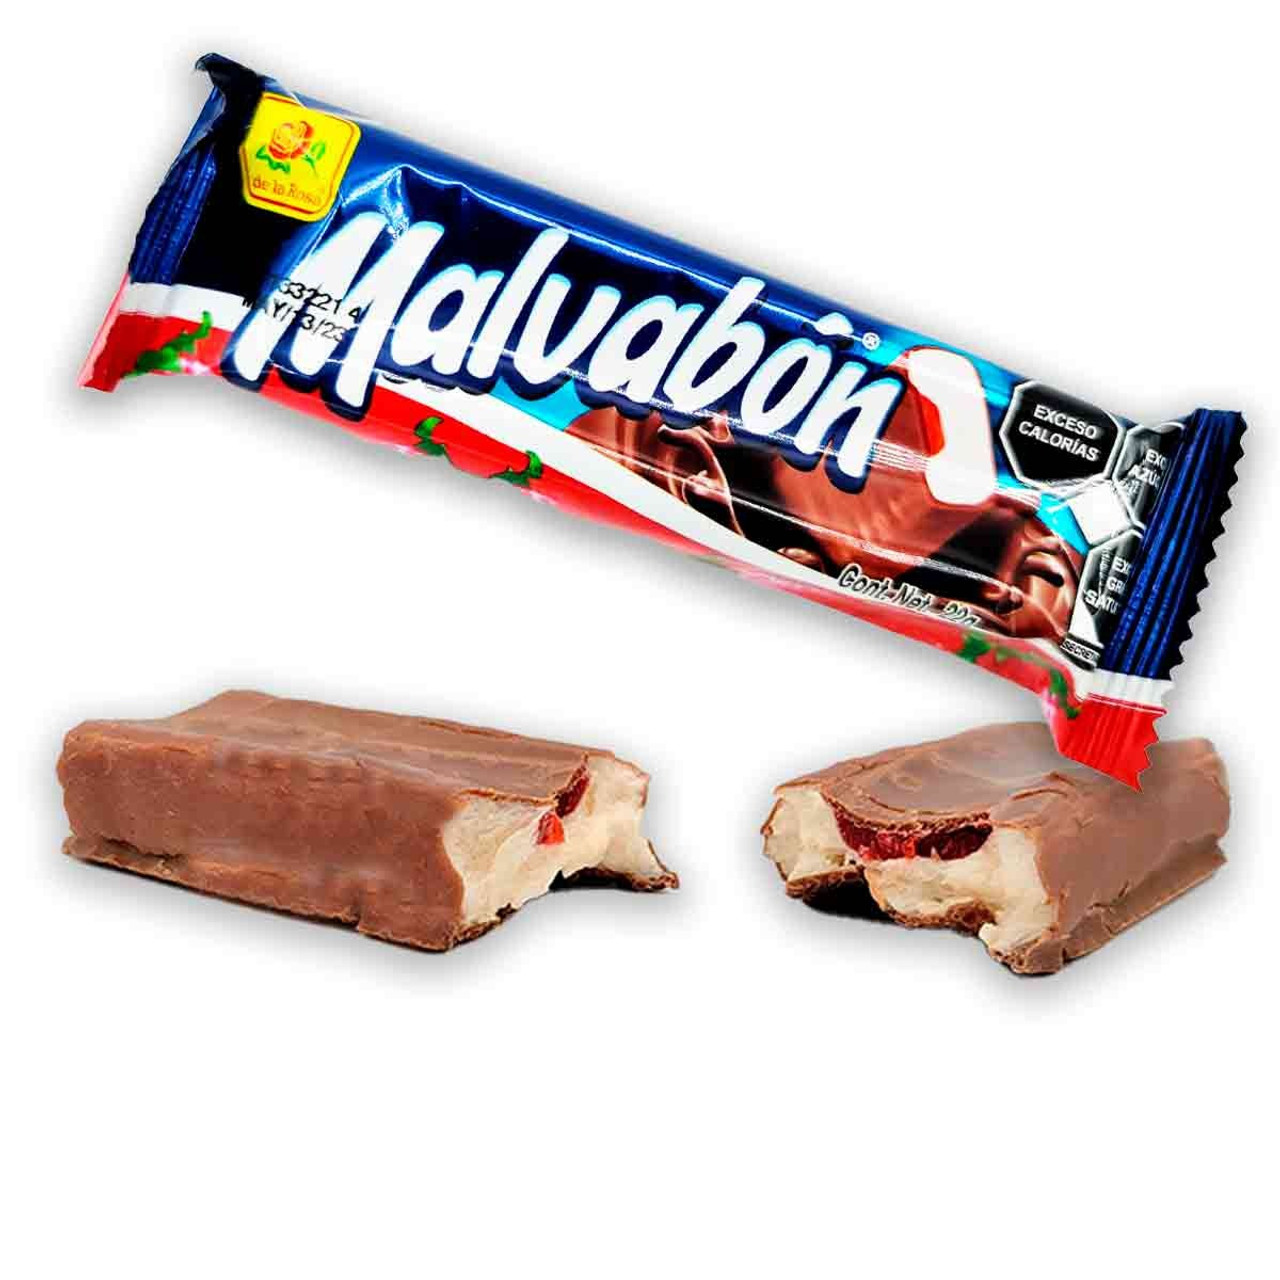 Tasty spongy marshmallow bars covered with a thin layer of sweet dark chocolate and filled with a creamy and fruity strawberry jelly.